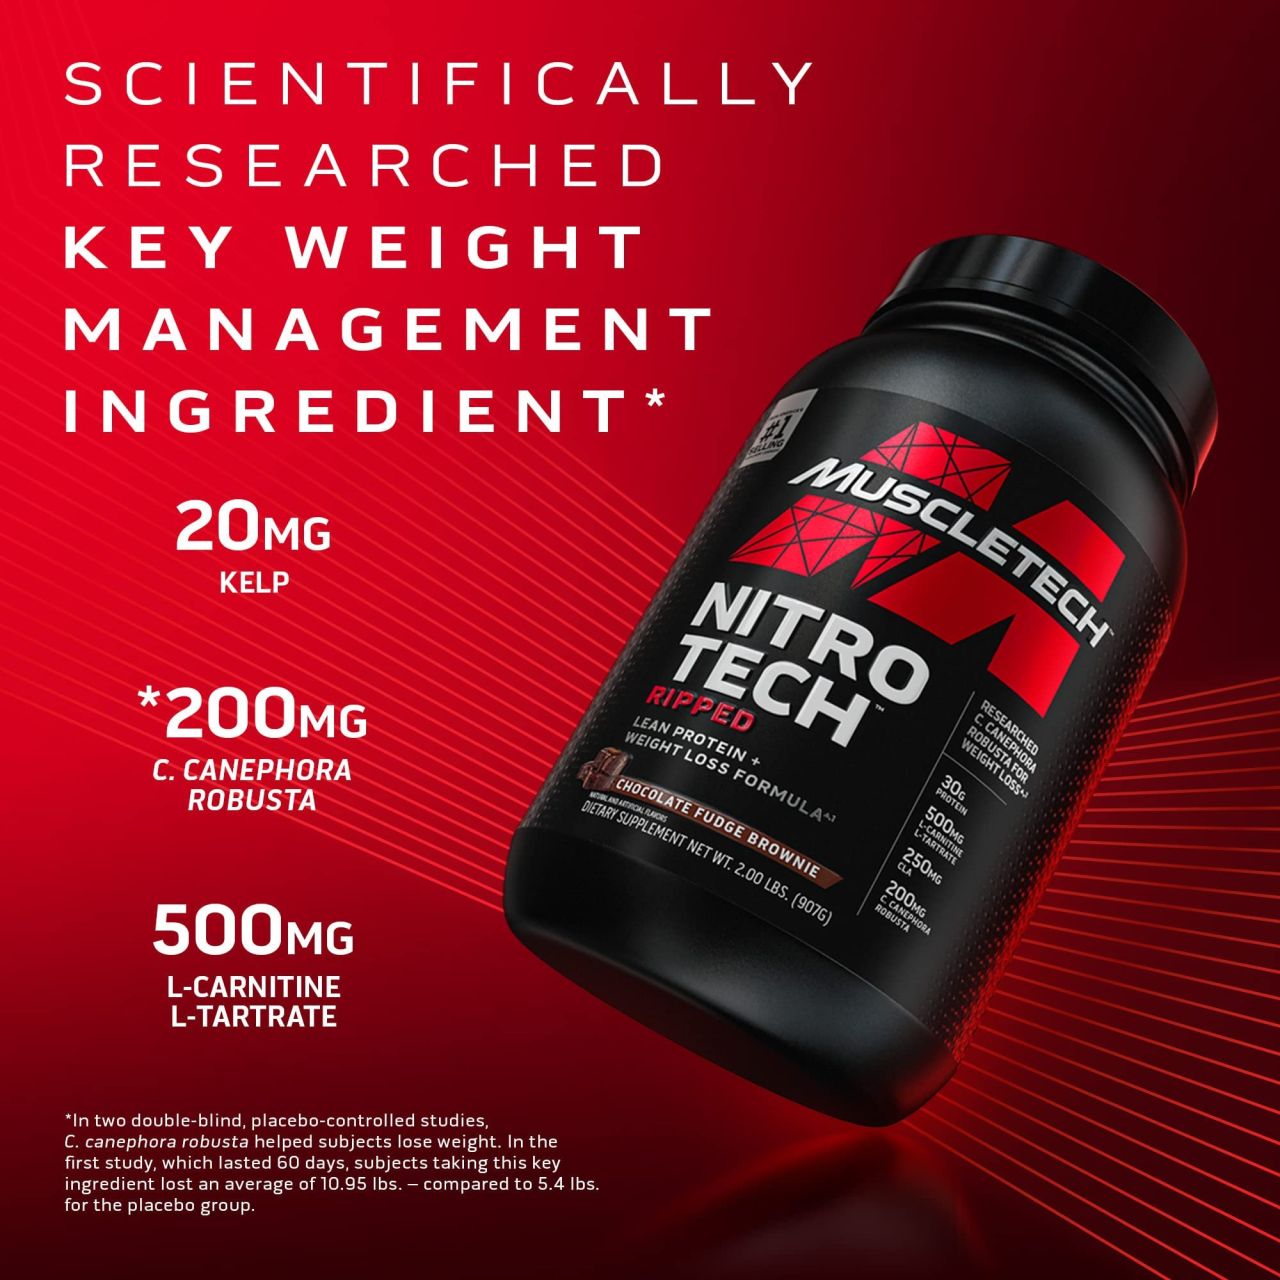 MUSCLETECH - NITRO TECH RIPPED - LEAN PROTEIN PLUS WEIGHT LOSS FORMULA - 2 LBS - 908 G